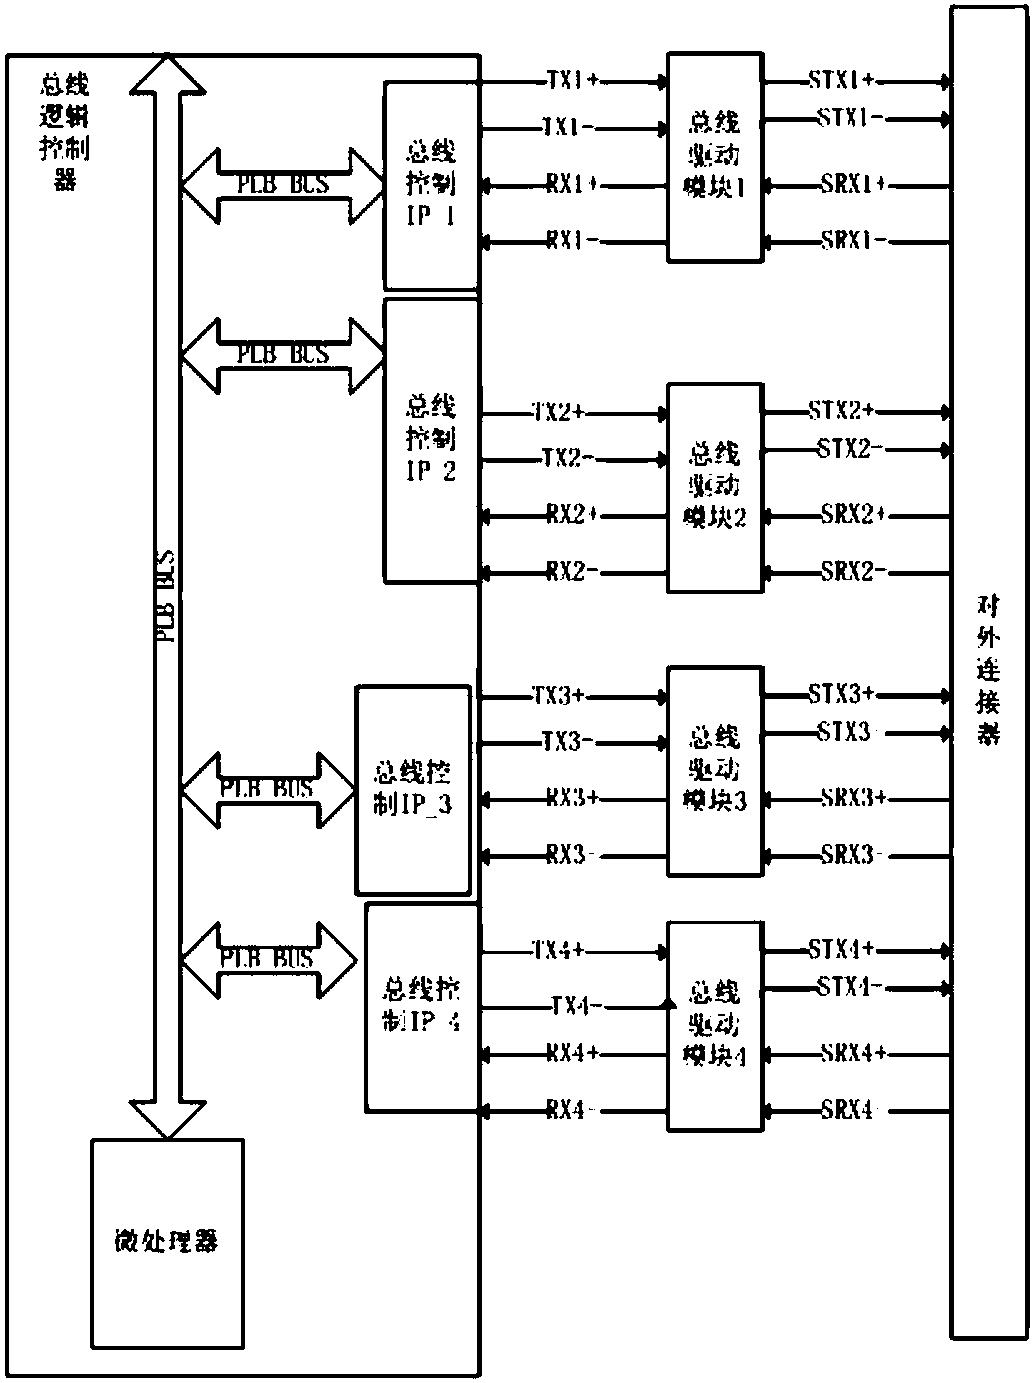 Method for realizing same-position replacement of various buses